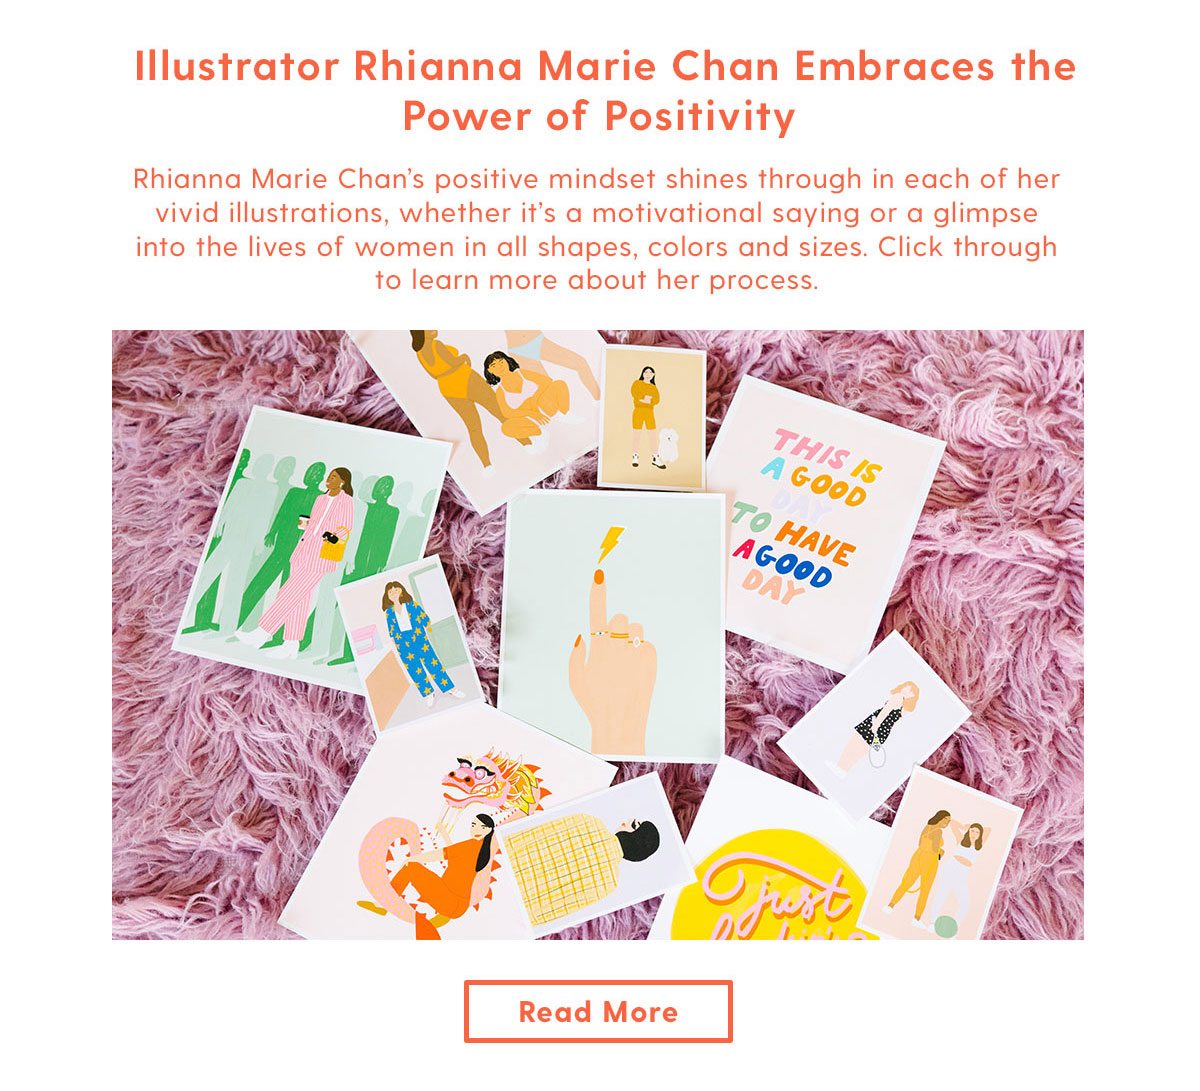  Rhianna Marie Chan’s positive mindset shines through in each of her vivid illustrations, whether it’s a motivational saying or a glimpse into the lives of women in all shapes, colors and sizes. Click through to learn more about her process. Read More > 